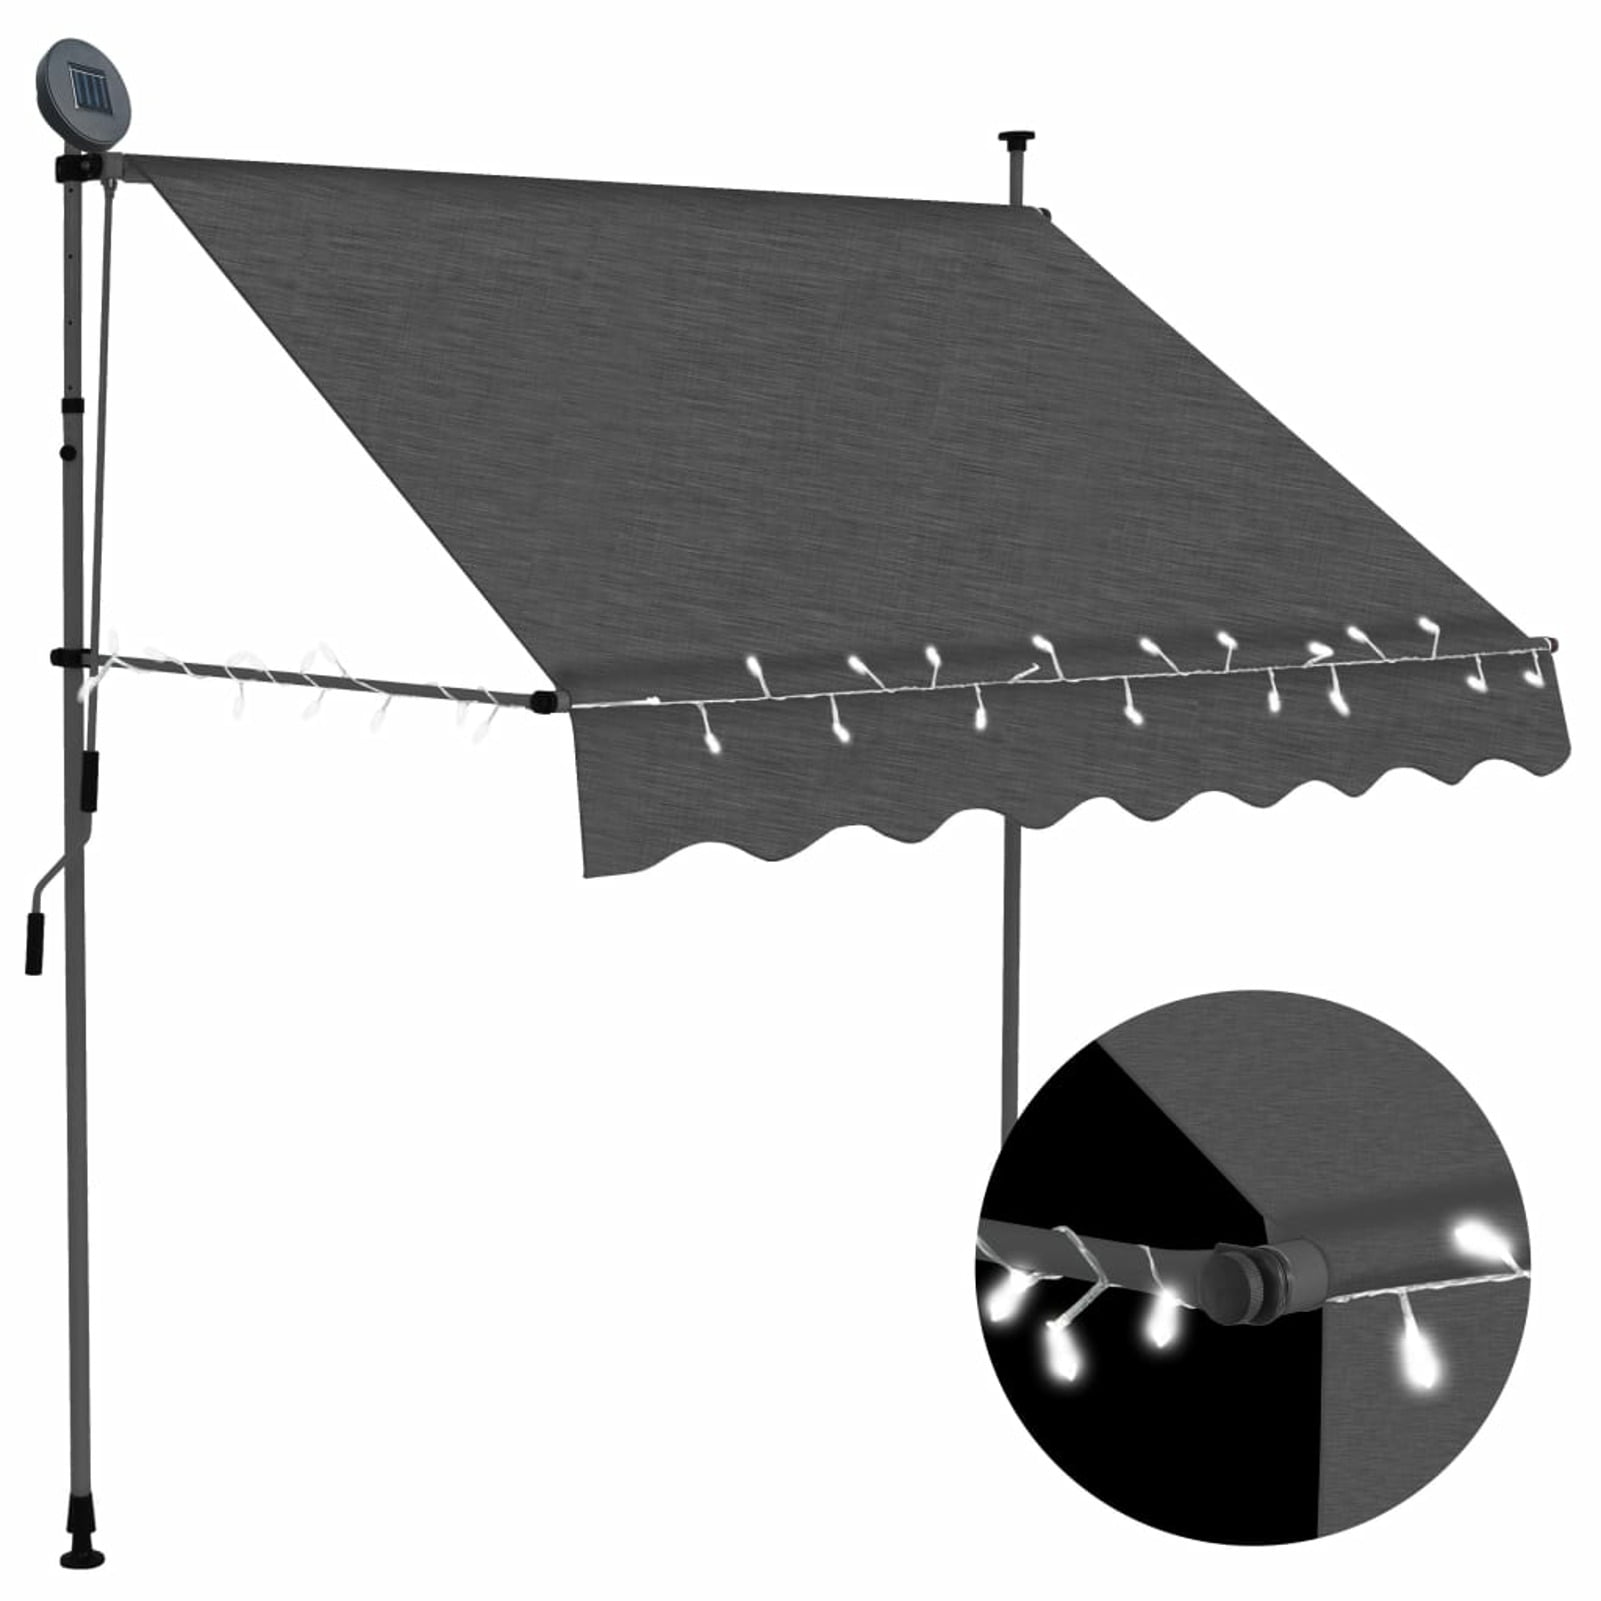 Details about   Retractable Patio Awning Outdoor Canopy Deck Cafe Sun Shade Shelter Manual Crank 